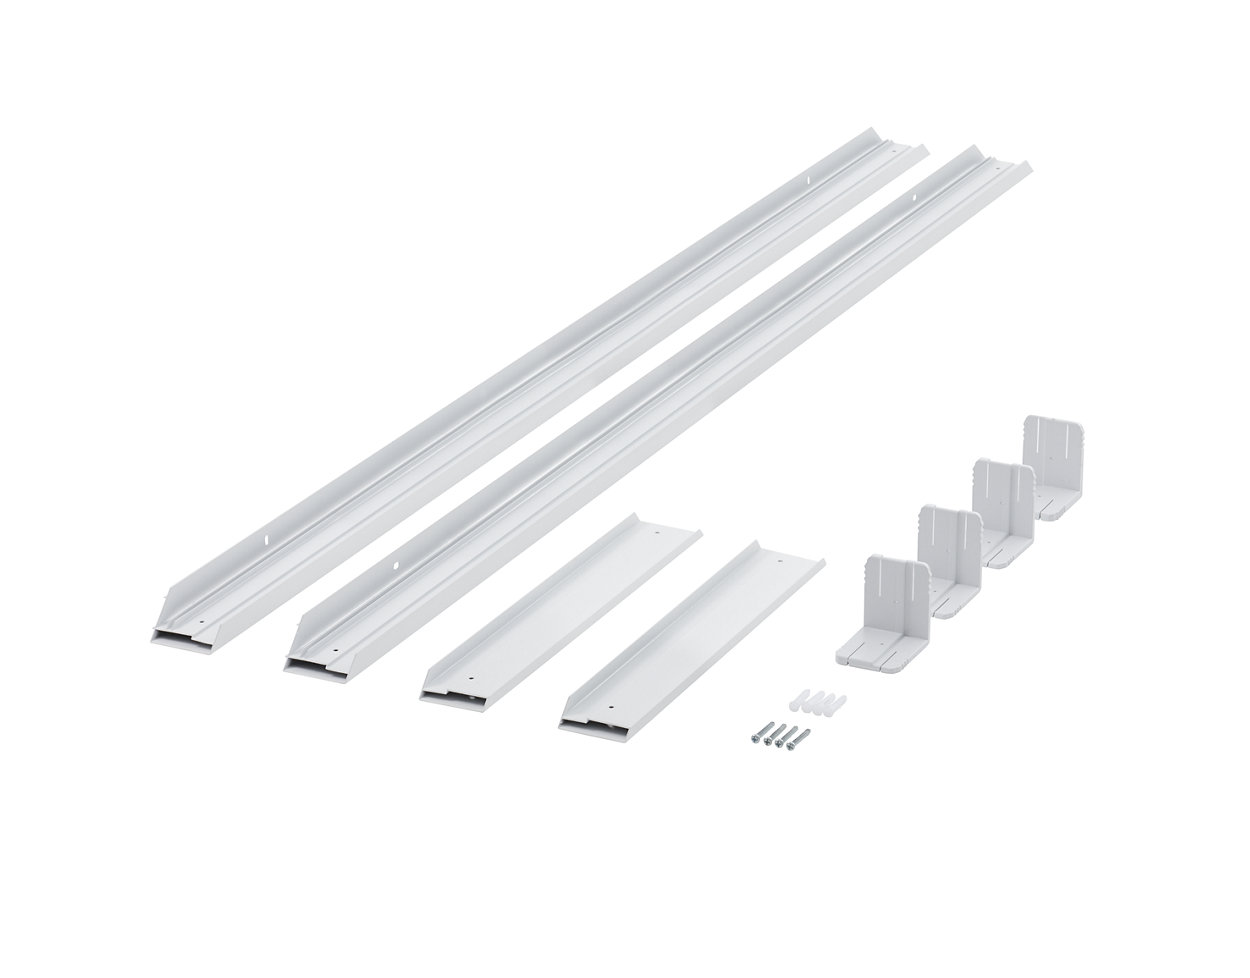 CoreLine Recessed – the clear choice for LED